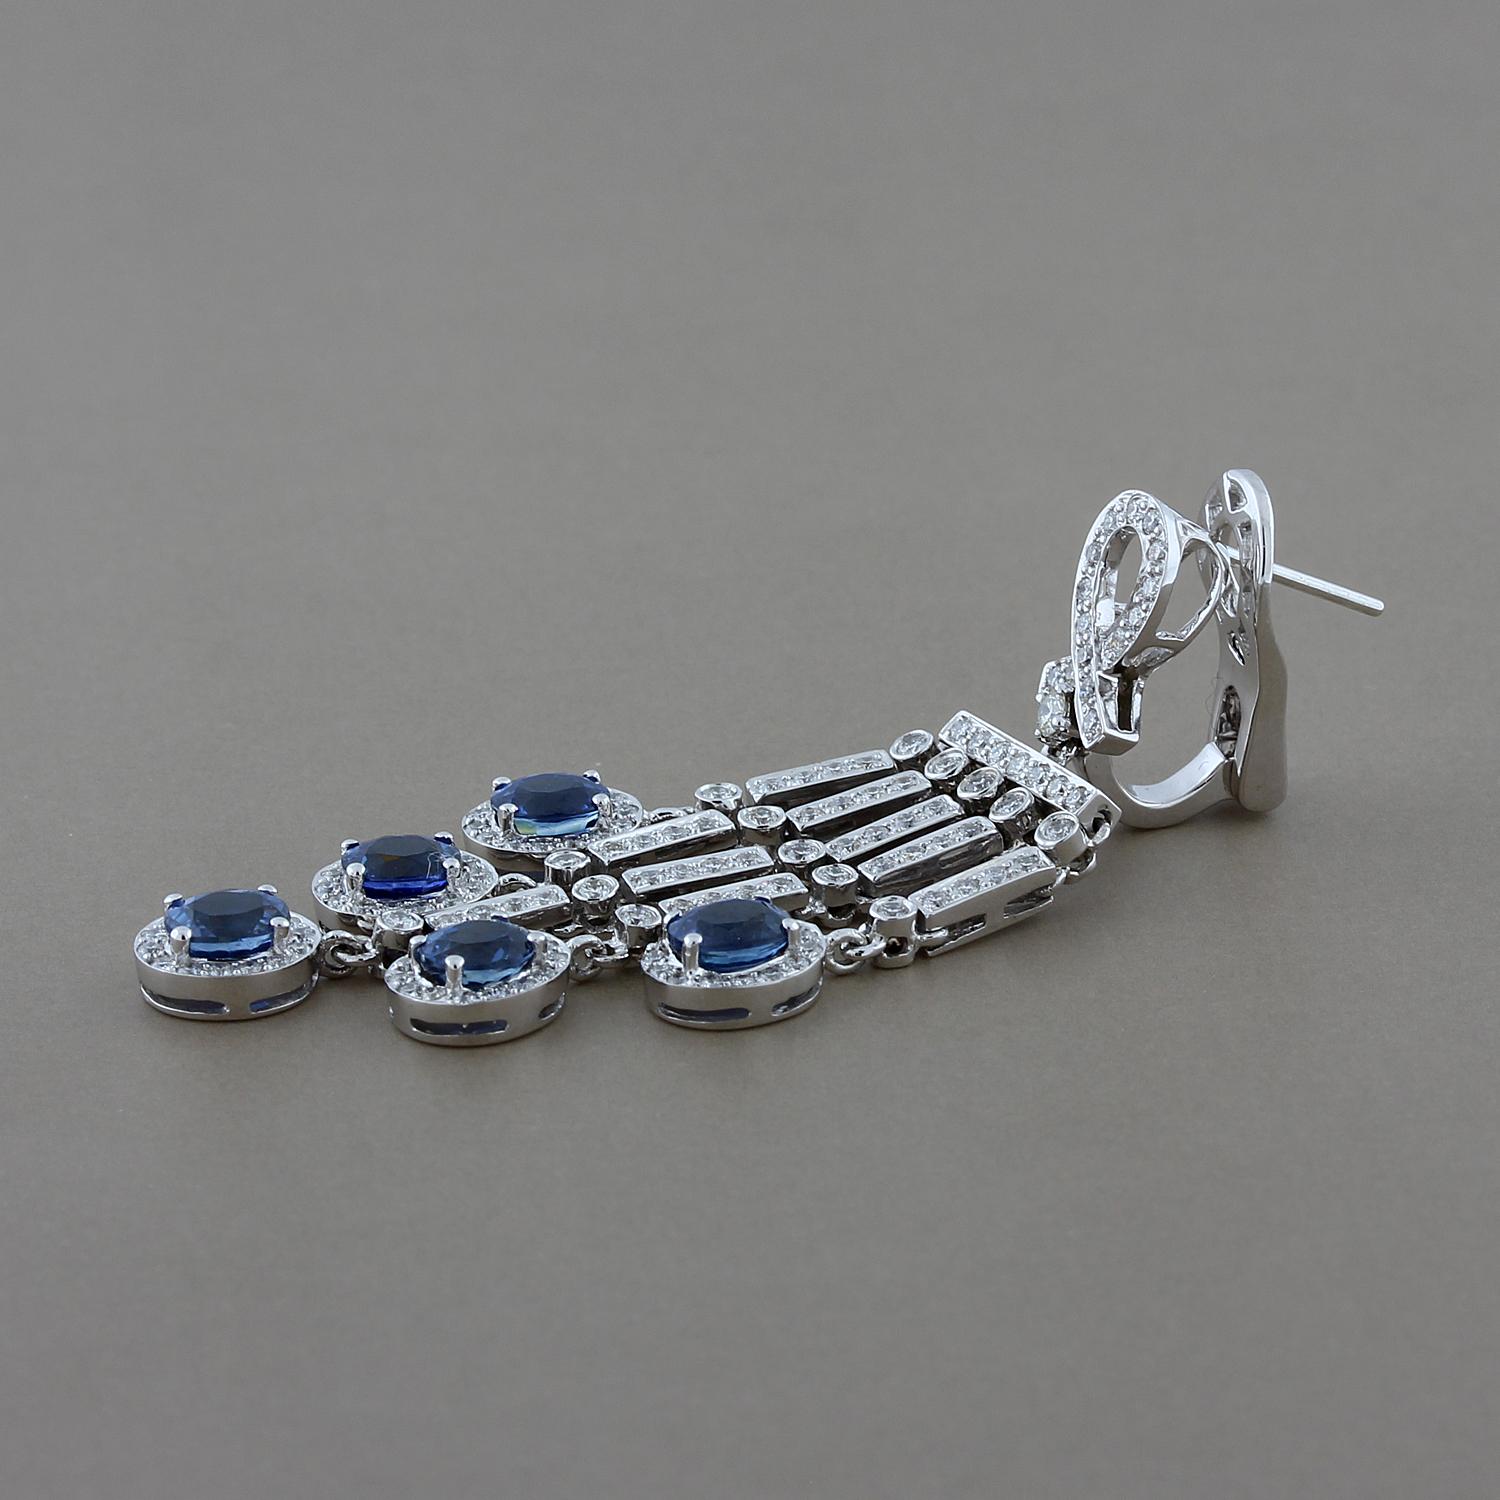 Sophisticated elegance! These earrings feature 5.43 carats of oval shape blue sapphires accented by 2.09 carats of round cut diamonds. These chandelier drop earrings are set in 18K white gold with omega clip backings.

Earring Length: 2.15